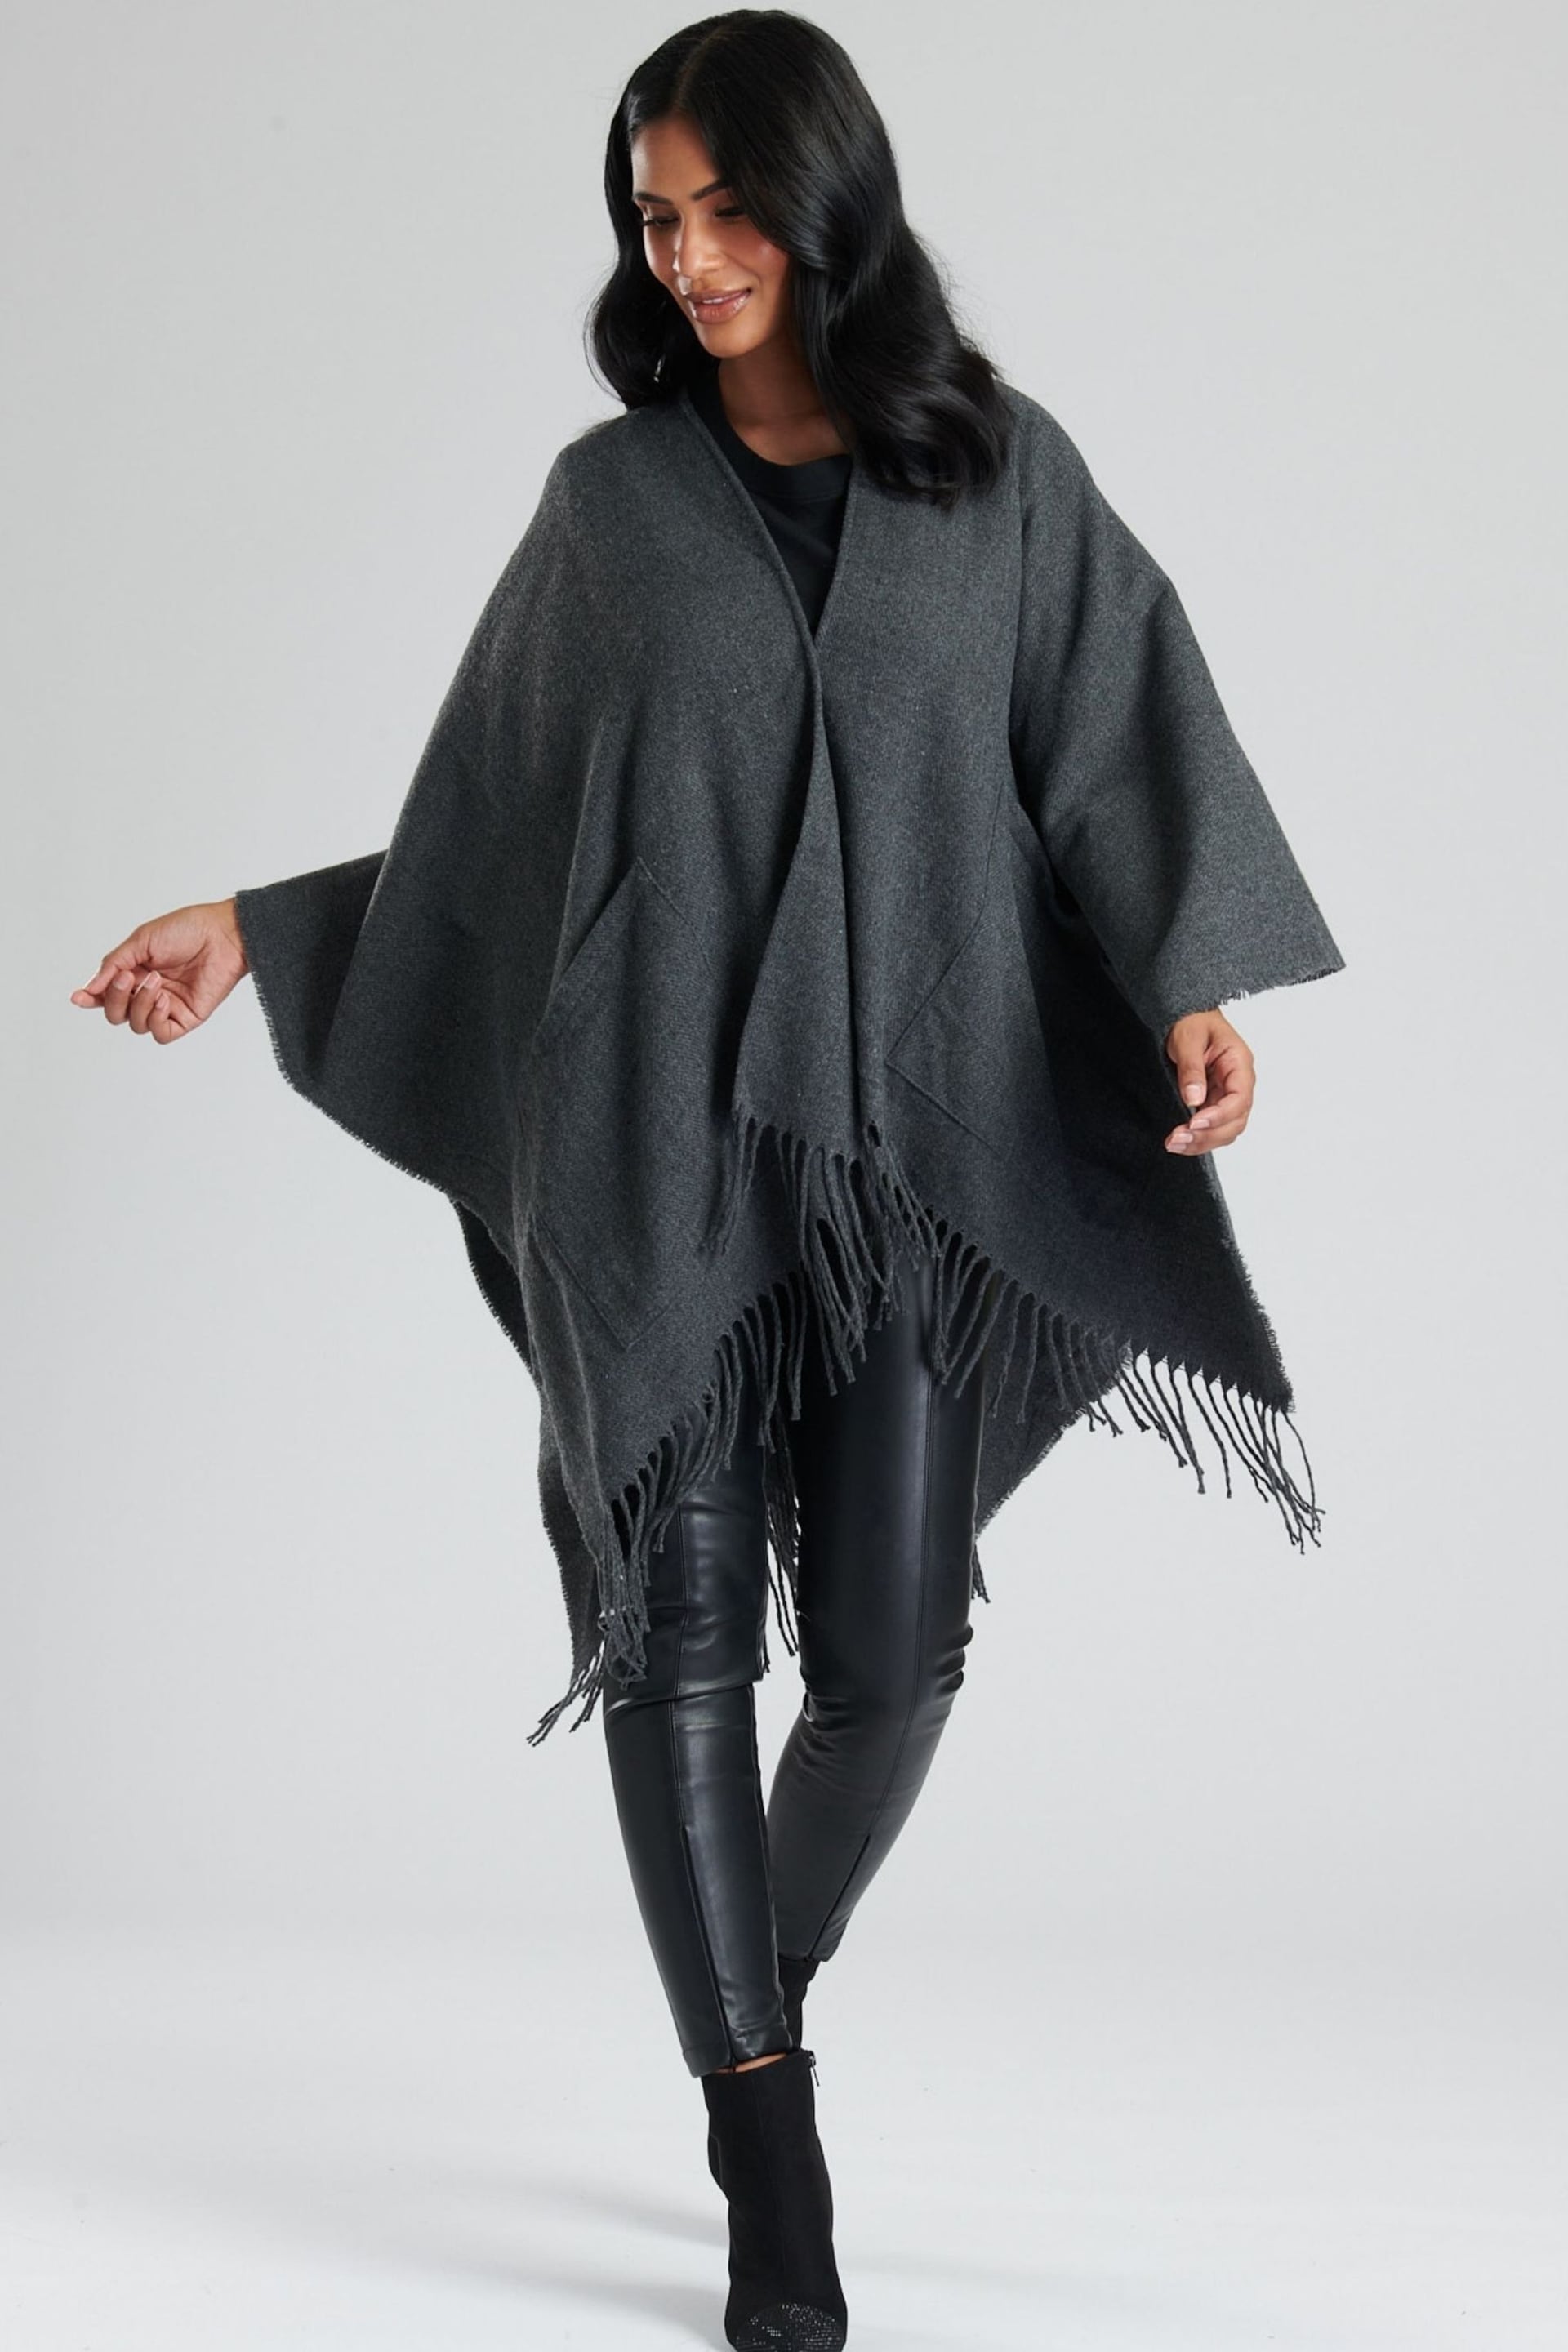 South Beach Grey Knitted Fringe Wrap - Image 1 of 4